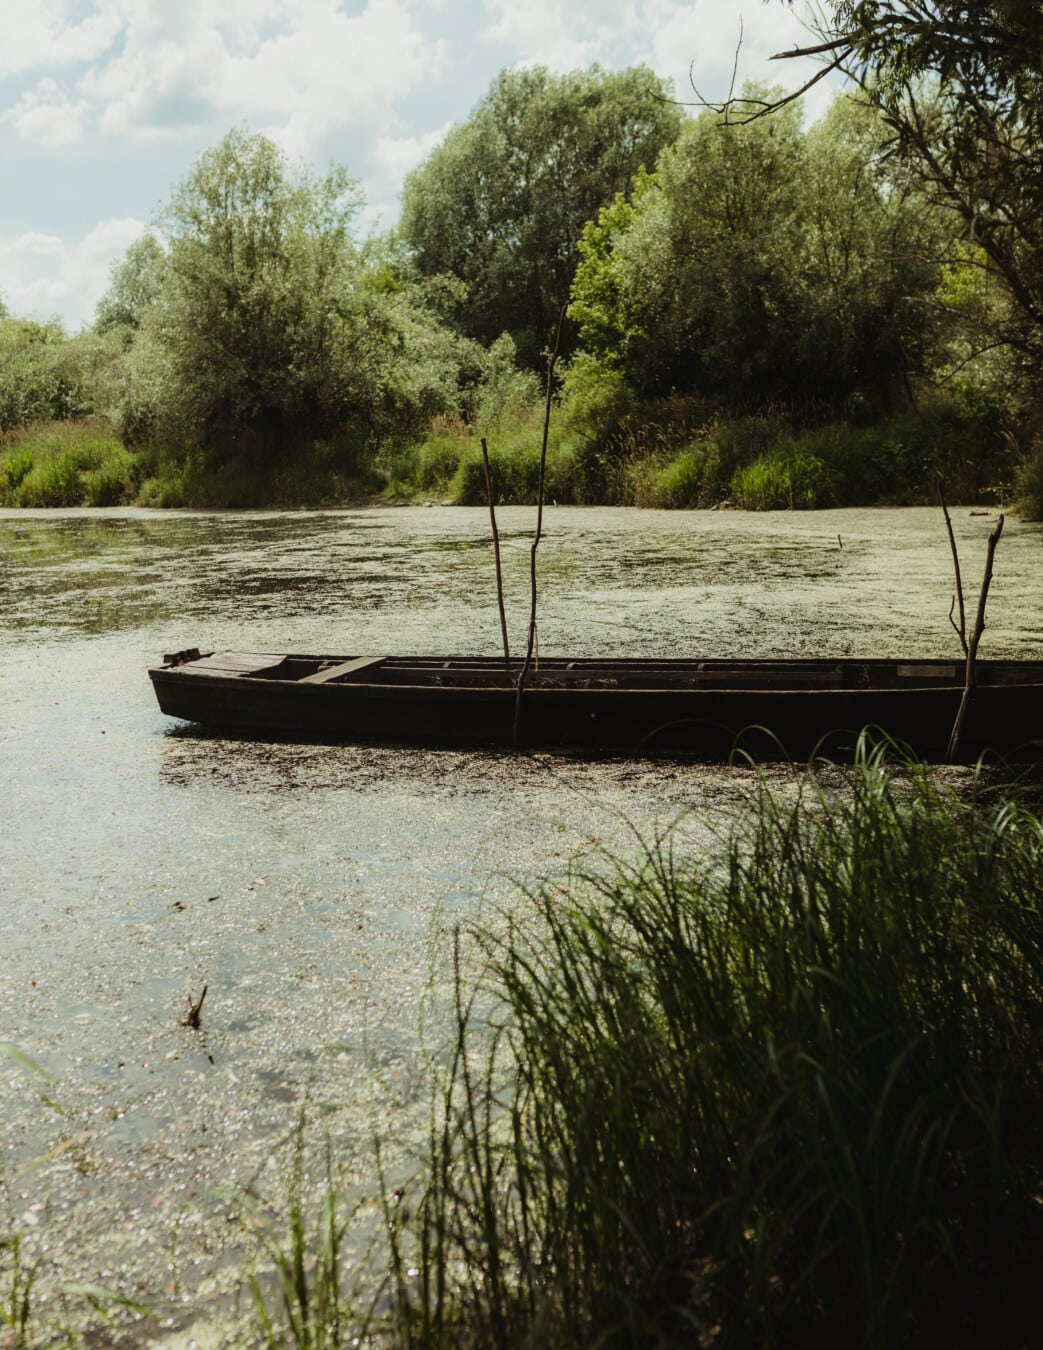 boat, wooden, old, channel, aquatic plant, water, river, landscape, nature, reflection